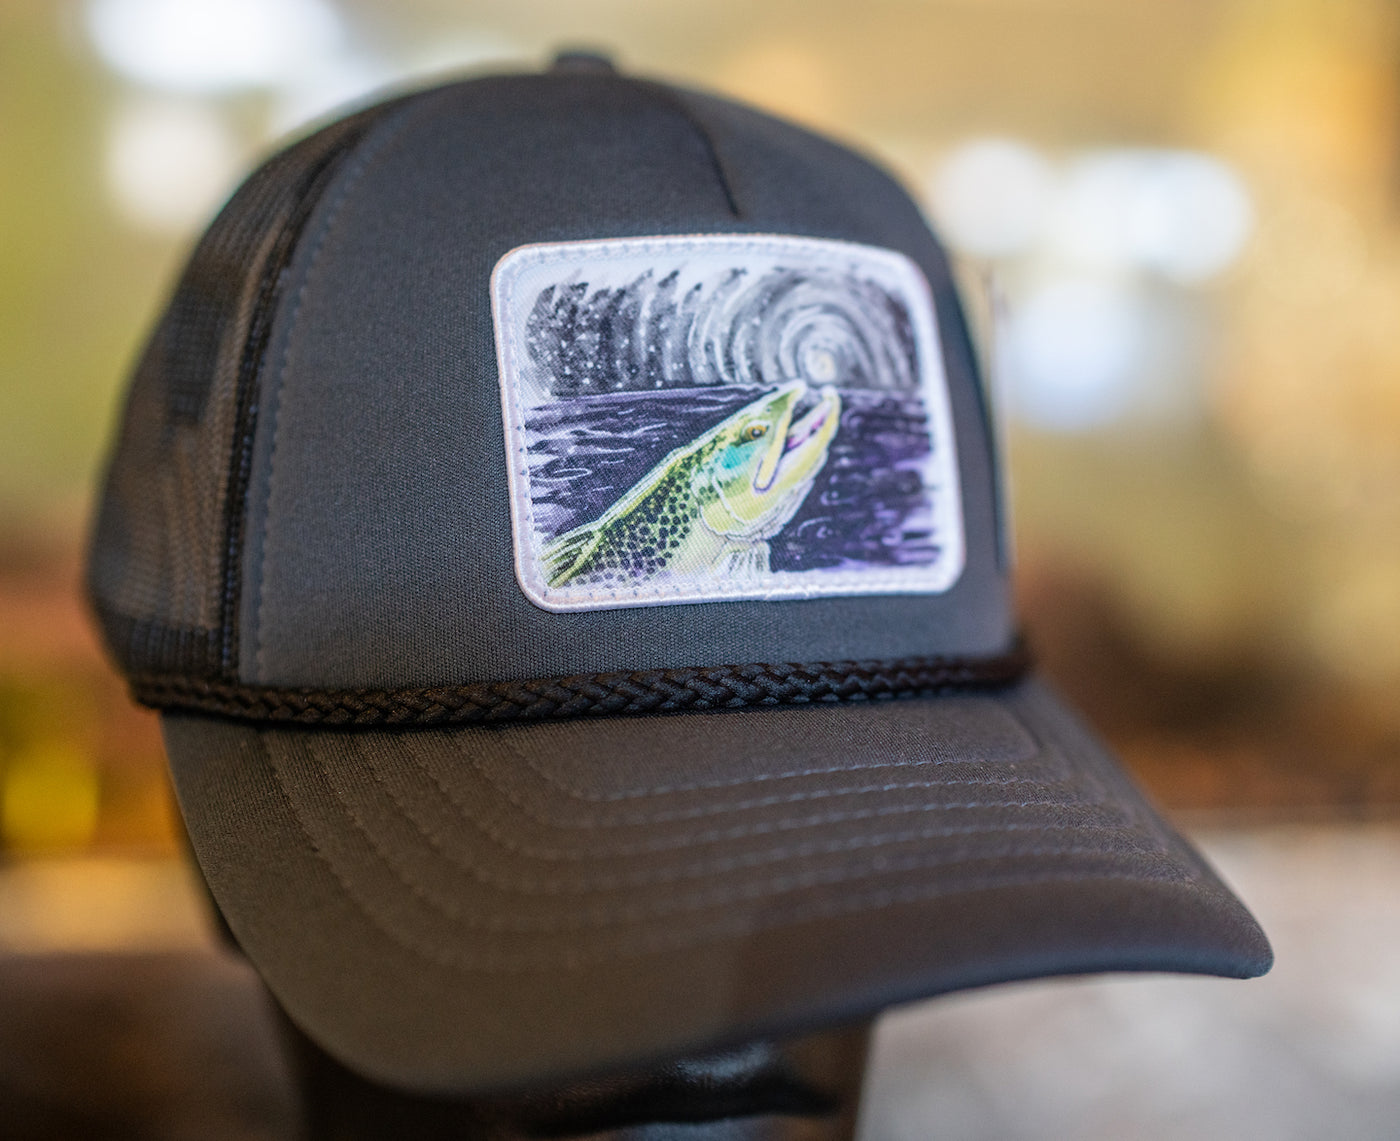 Jacob Lutz Richardson 213Foam Trucker "Rising To The Moon" Patch On Sale Now 50% OFF!